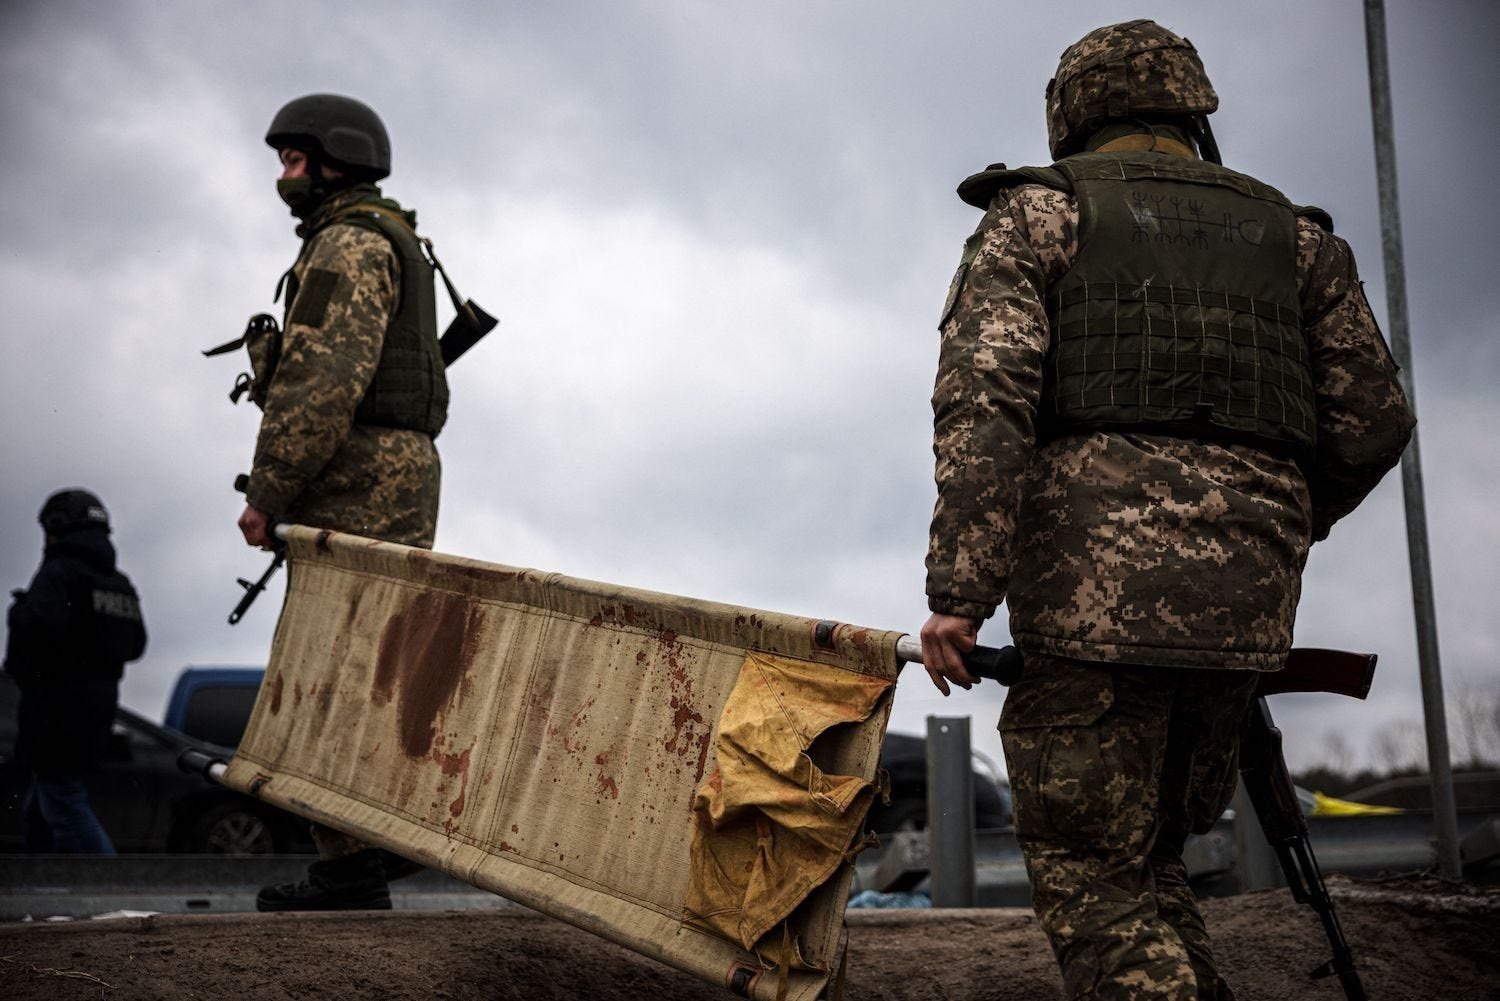 Ukrainian troops with a blood-stained stretcher near the city of Irpin, northwest of Kyiv, March 13, 2022. Dimitar Dilkoff/AFP via Getty Images